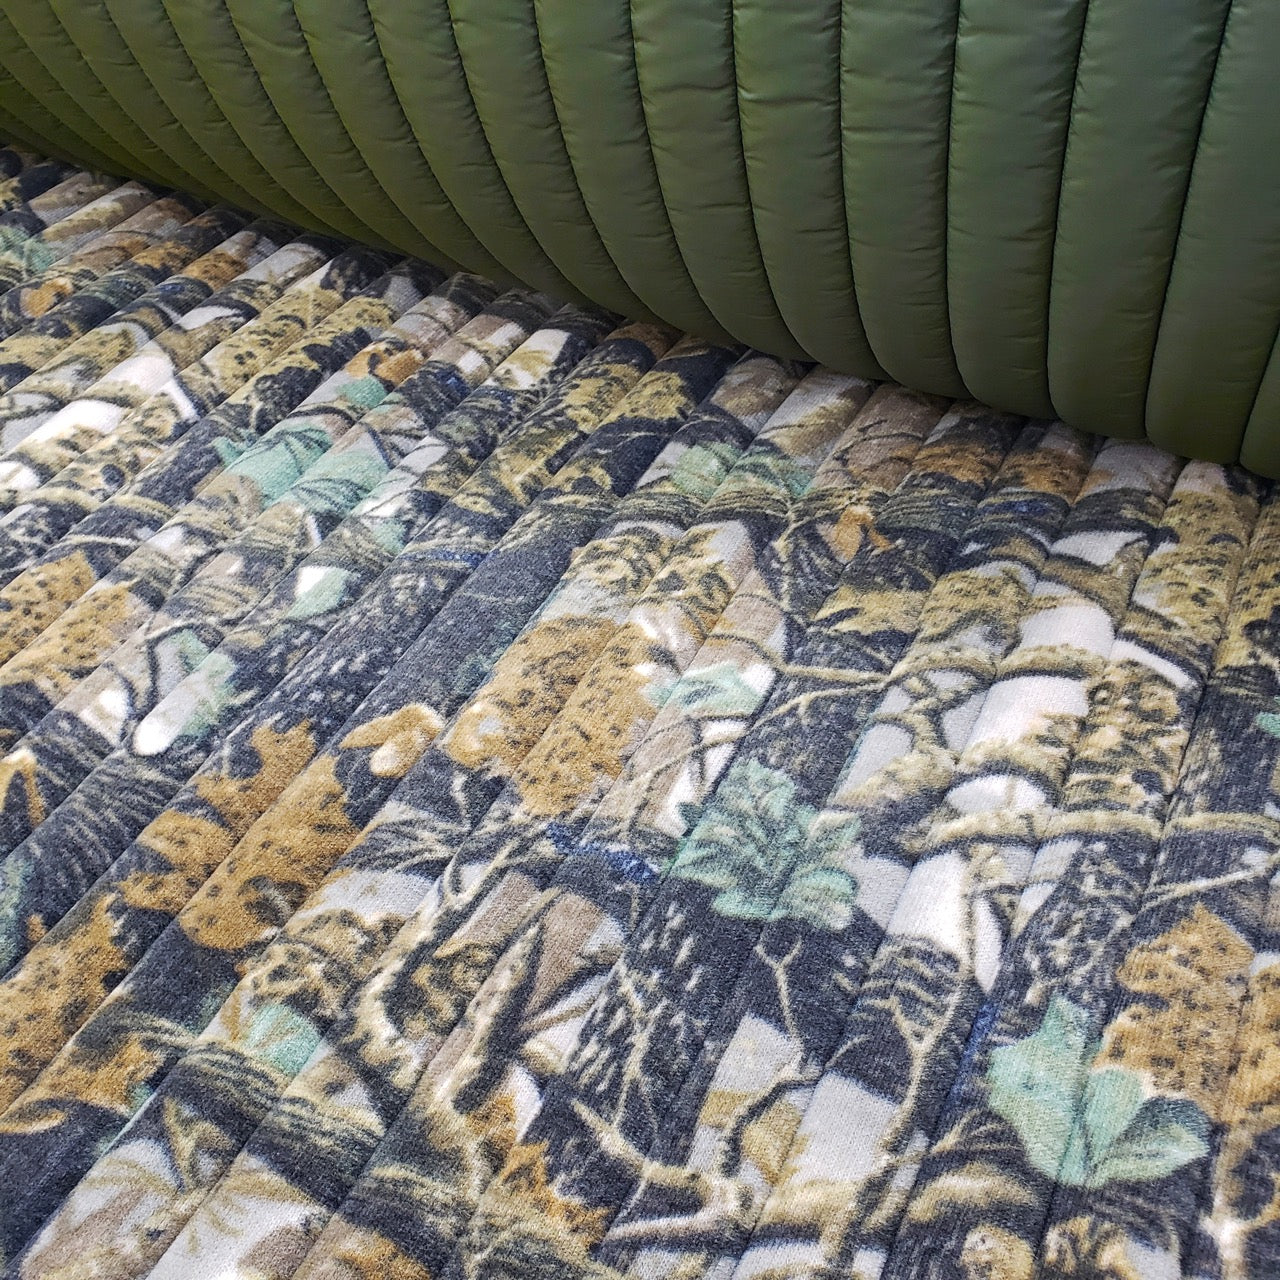 Quilted Polar 2-Sided 13oz - Camo Prints (Fleece) - Forest camo / olive 1